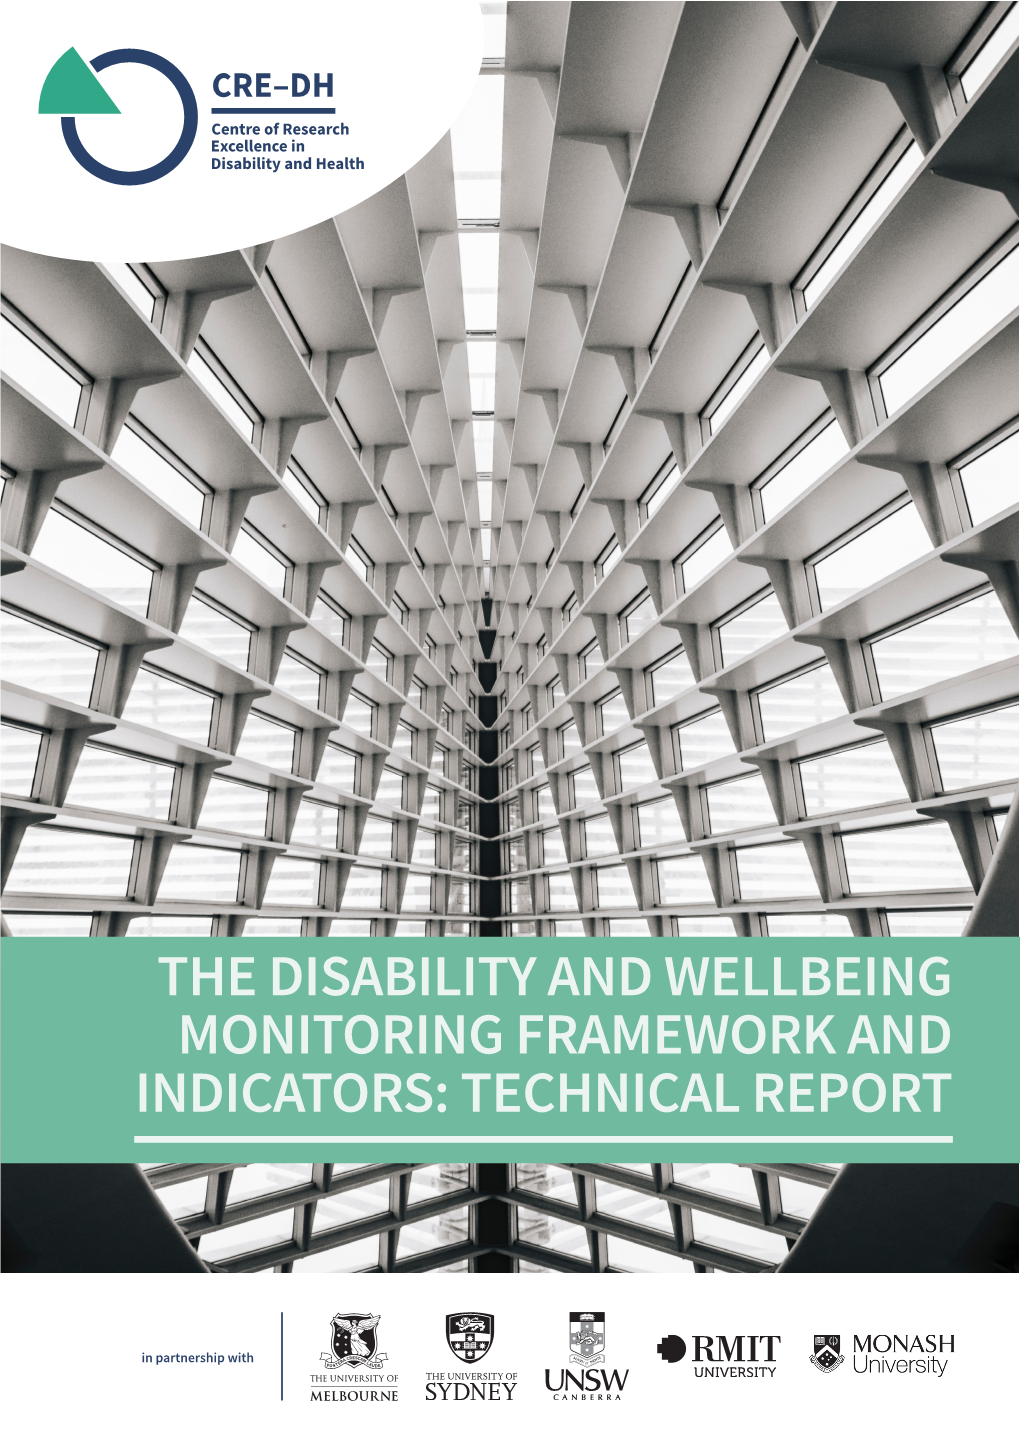 The Disability and Wellbeing Monitoring Framework and Indicators: Technical Report